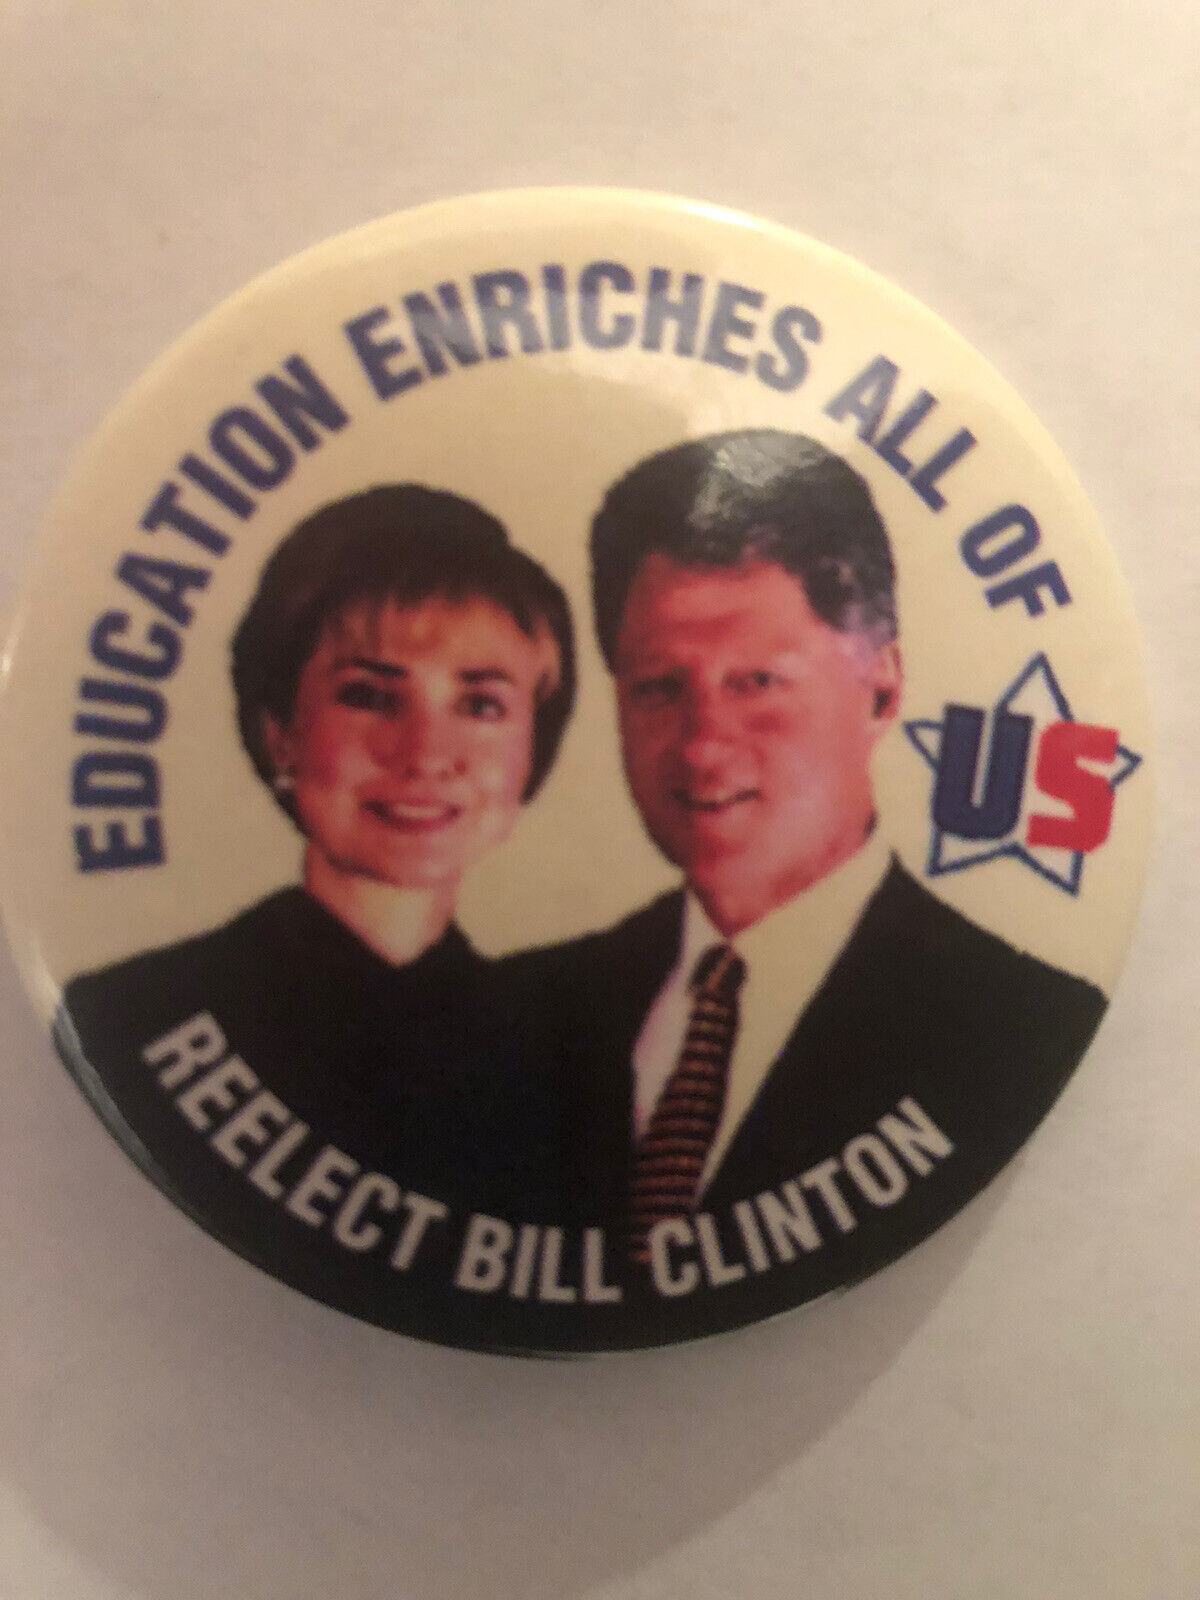 Education Enriches All Is US Reelect Bill Clinton (Hillary) 2 1/4”pinback button